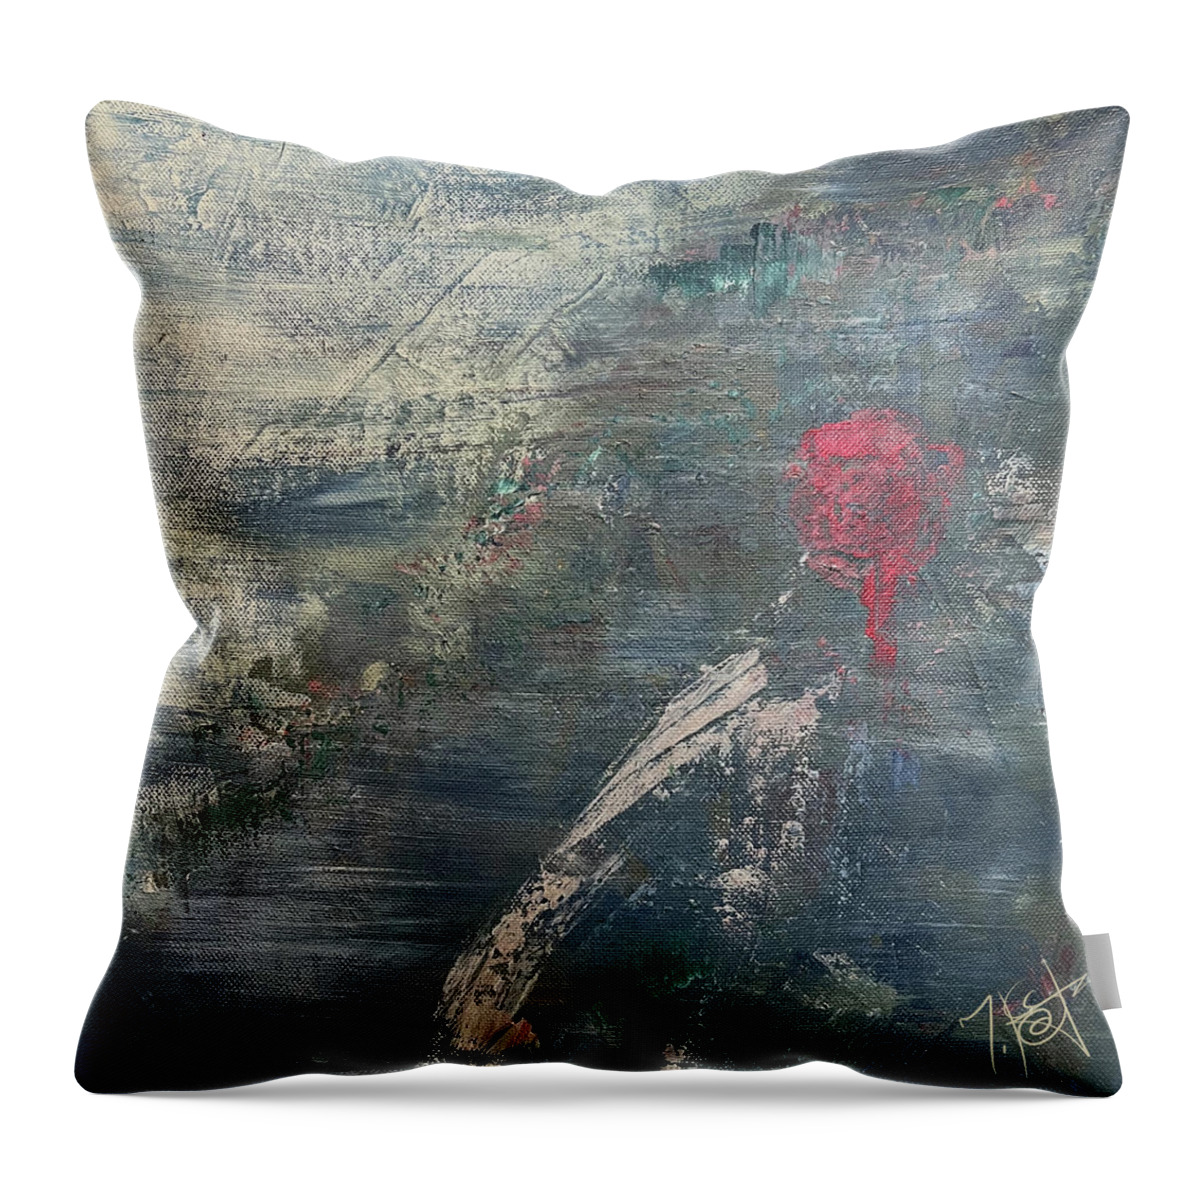 Abstract Throw Pillow featuring the painting The Secret by Tes Scholtz